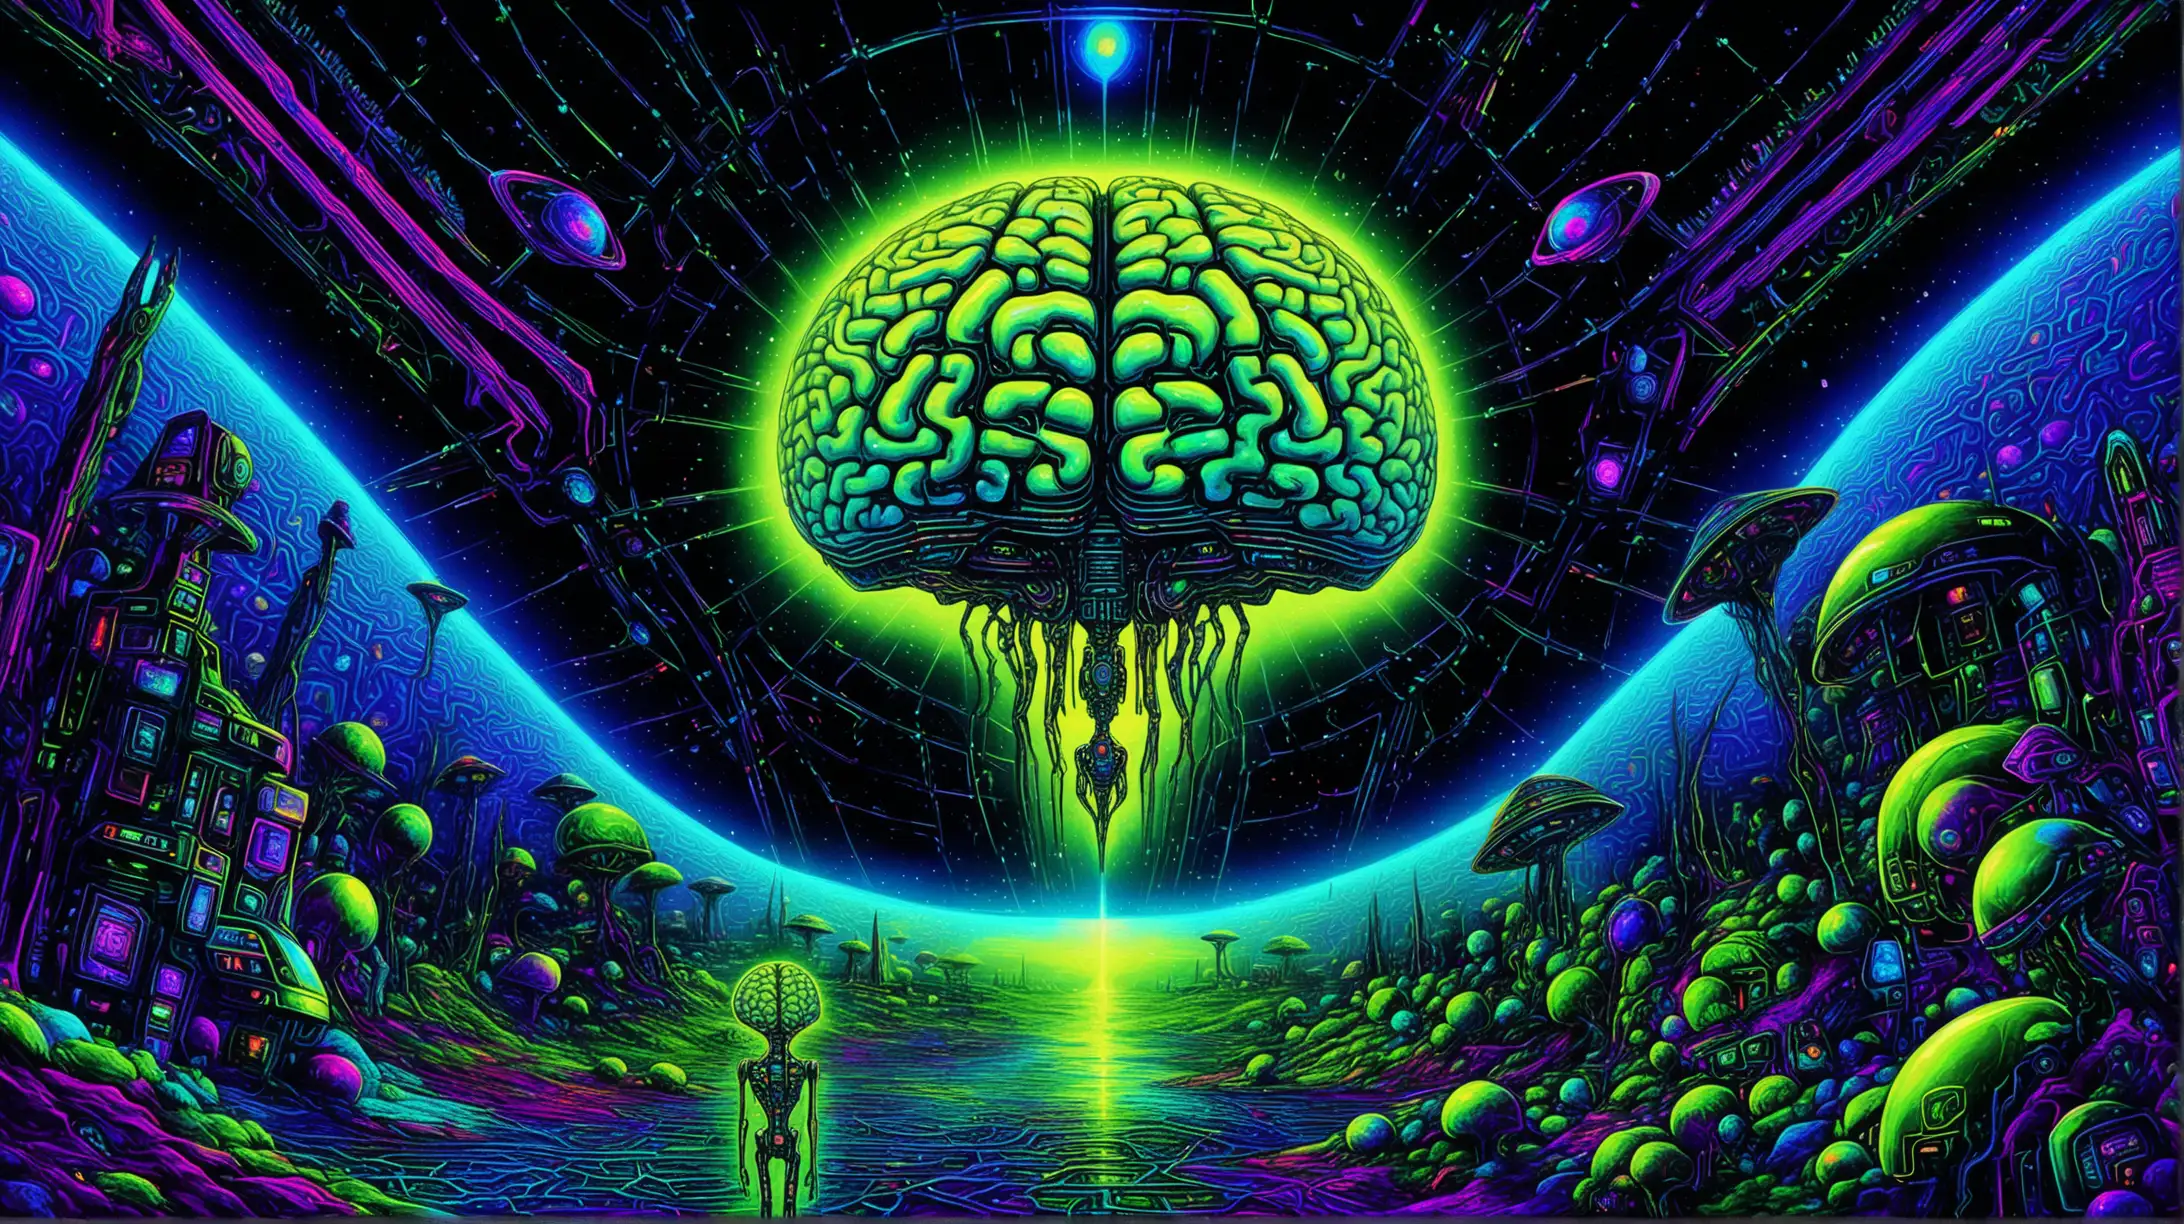 /imagine prompt: a large painting, a large alien digital brain, a futuristic environment, an intricate cyber neural network brain, alien spacecraft on an alien planet, a surreal futuristic world, robot brain neural network standing out from a black background in a painting style --surreal, blacklight, --aspect 1:1, --v 6